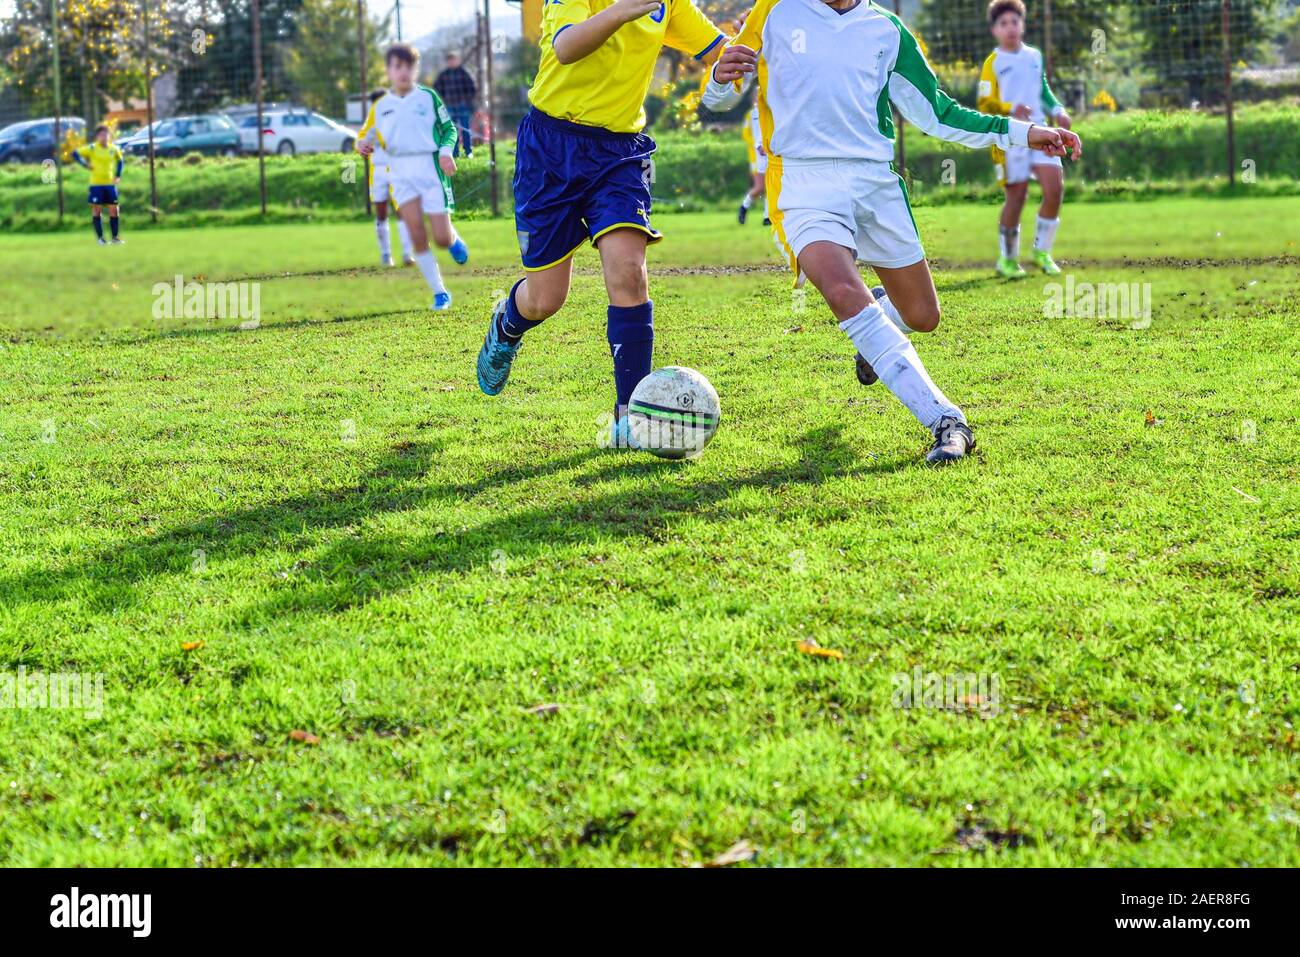 two young football players. Children play a soccer game. Legs in action with a ball. Stock Photo